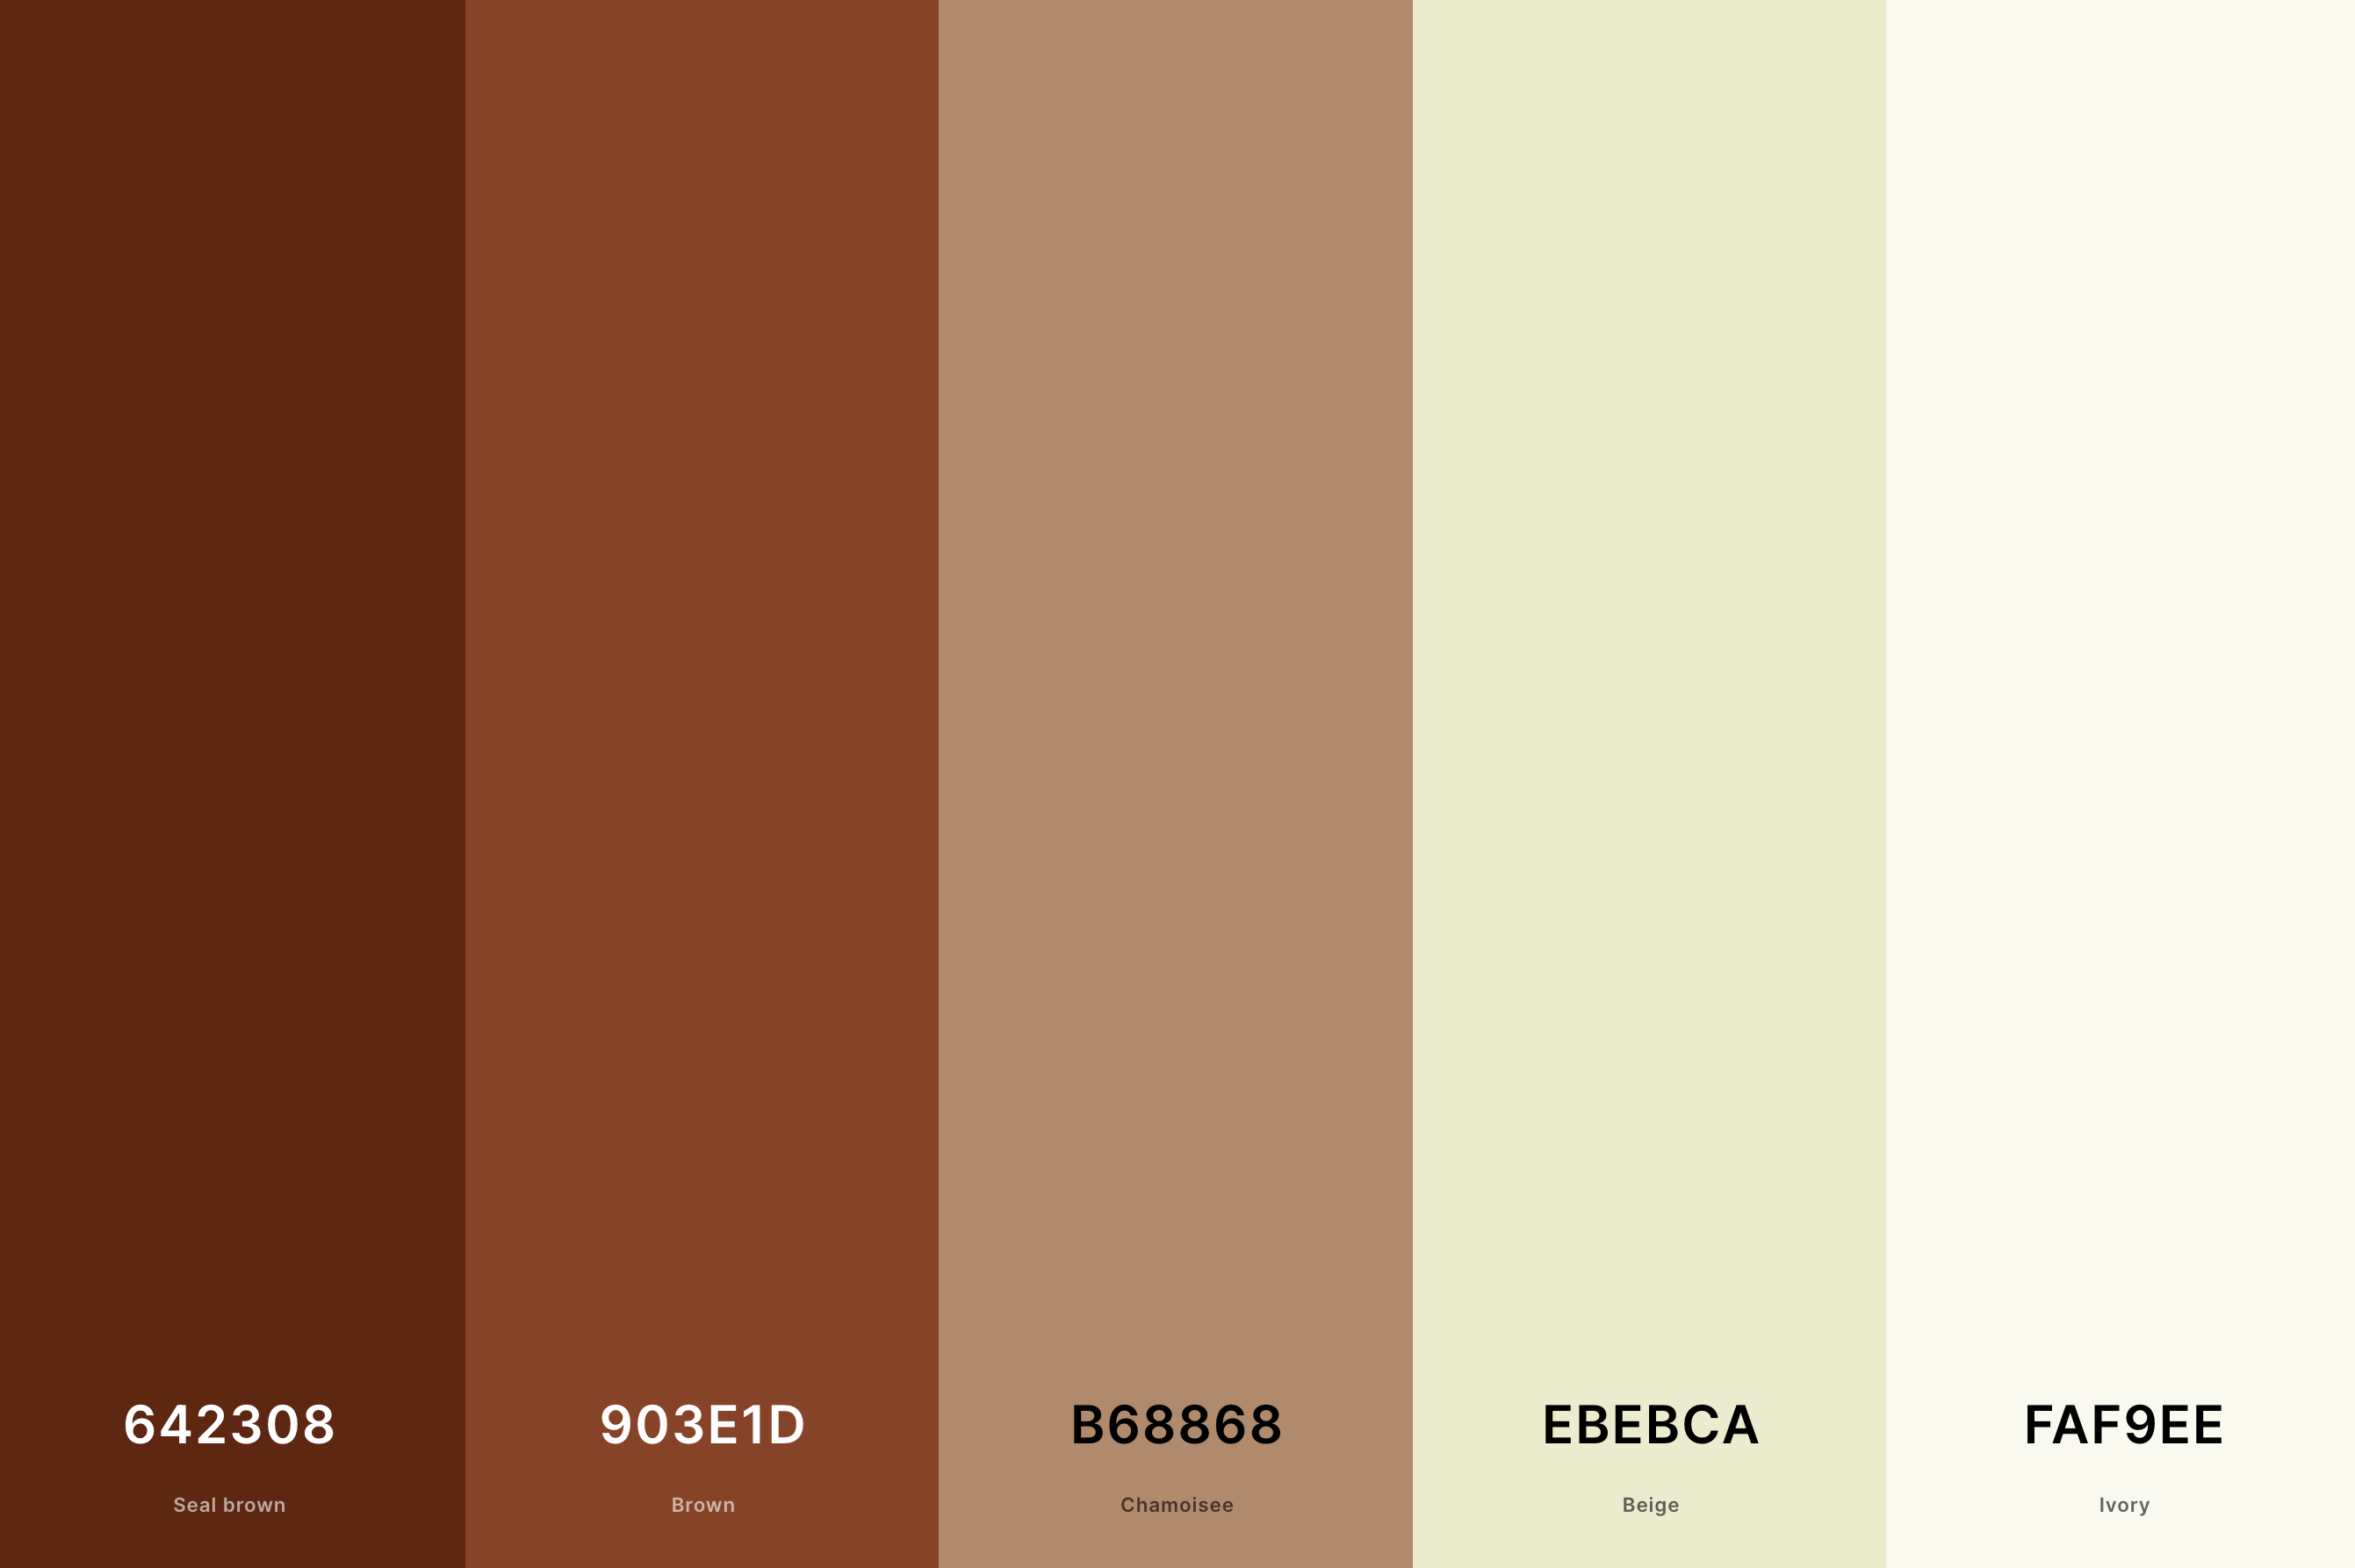 15. Terracotta And Beige Color Palette Color Palette with Seal Brown (Hex #642308) + Brown (Hex #903E1D) + Chamoisee (Hex #B68868) + Beige (Hex #EBEBCA) + Ivory (Hex #FAF9EE) Color Palette with Hex Codes